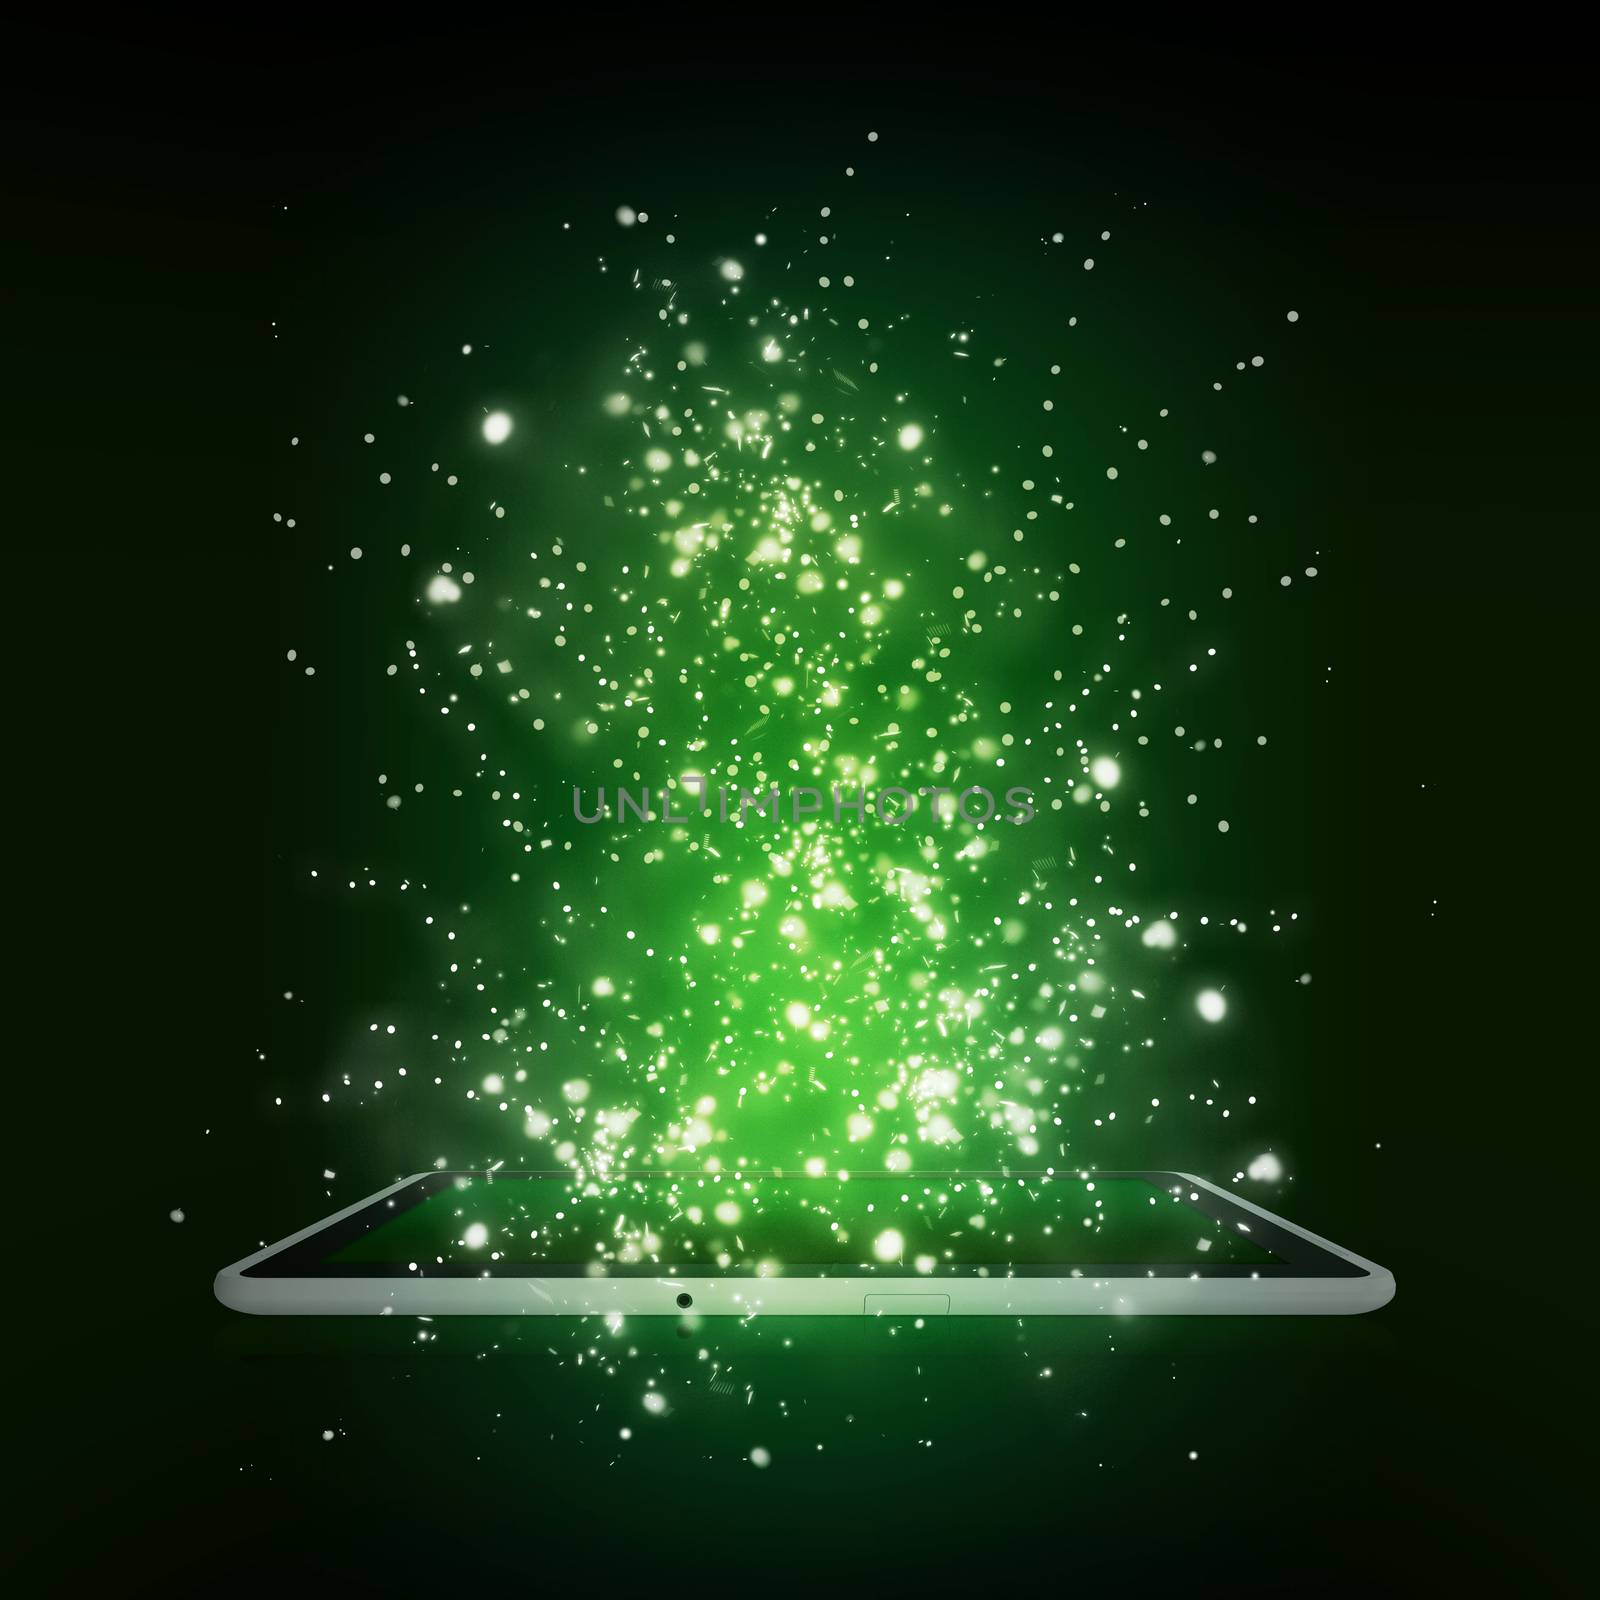 Tablet pc with magic light and falling stars. Dark background